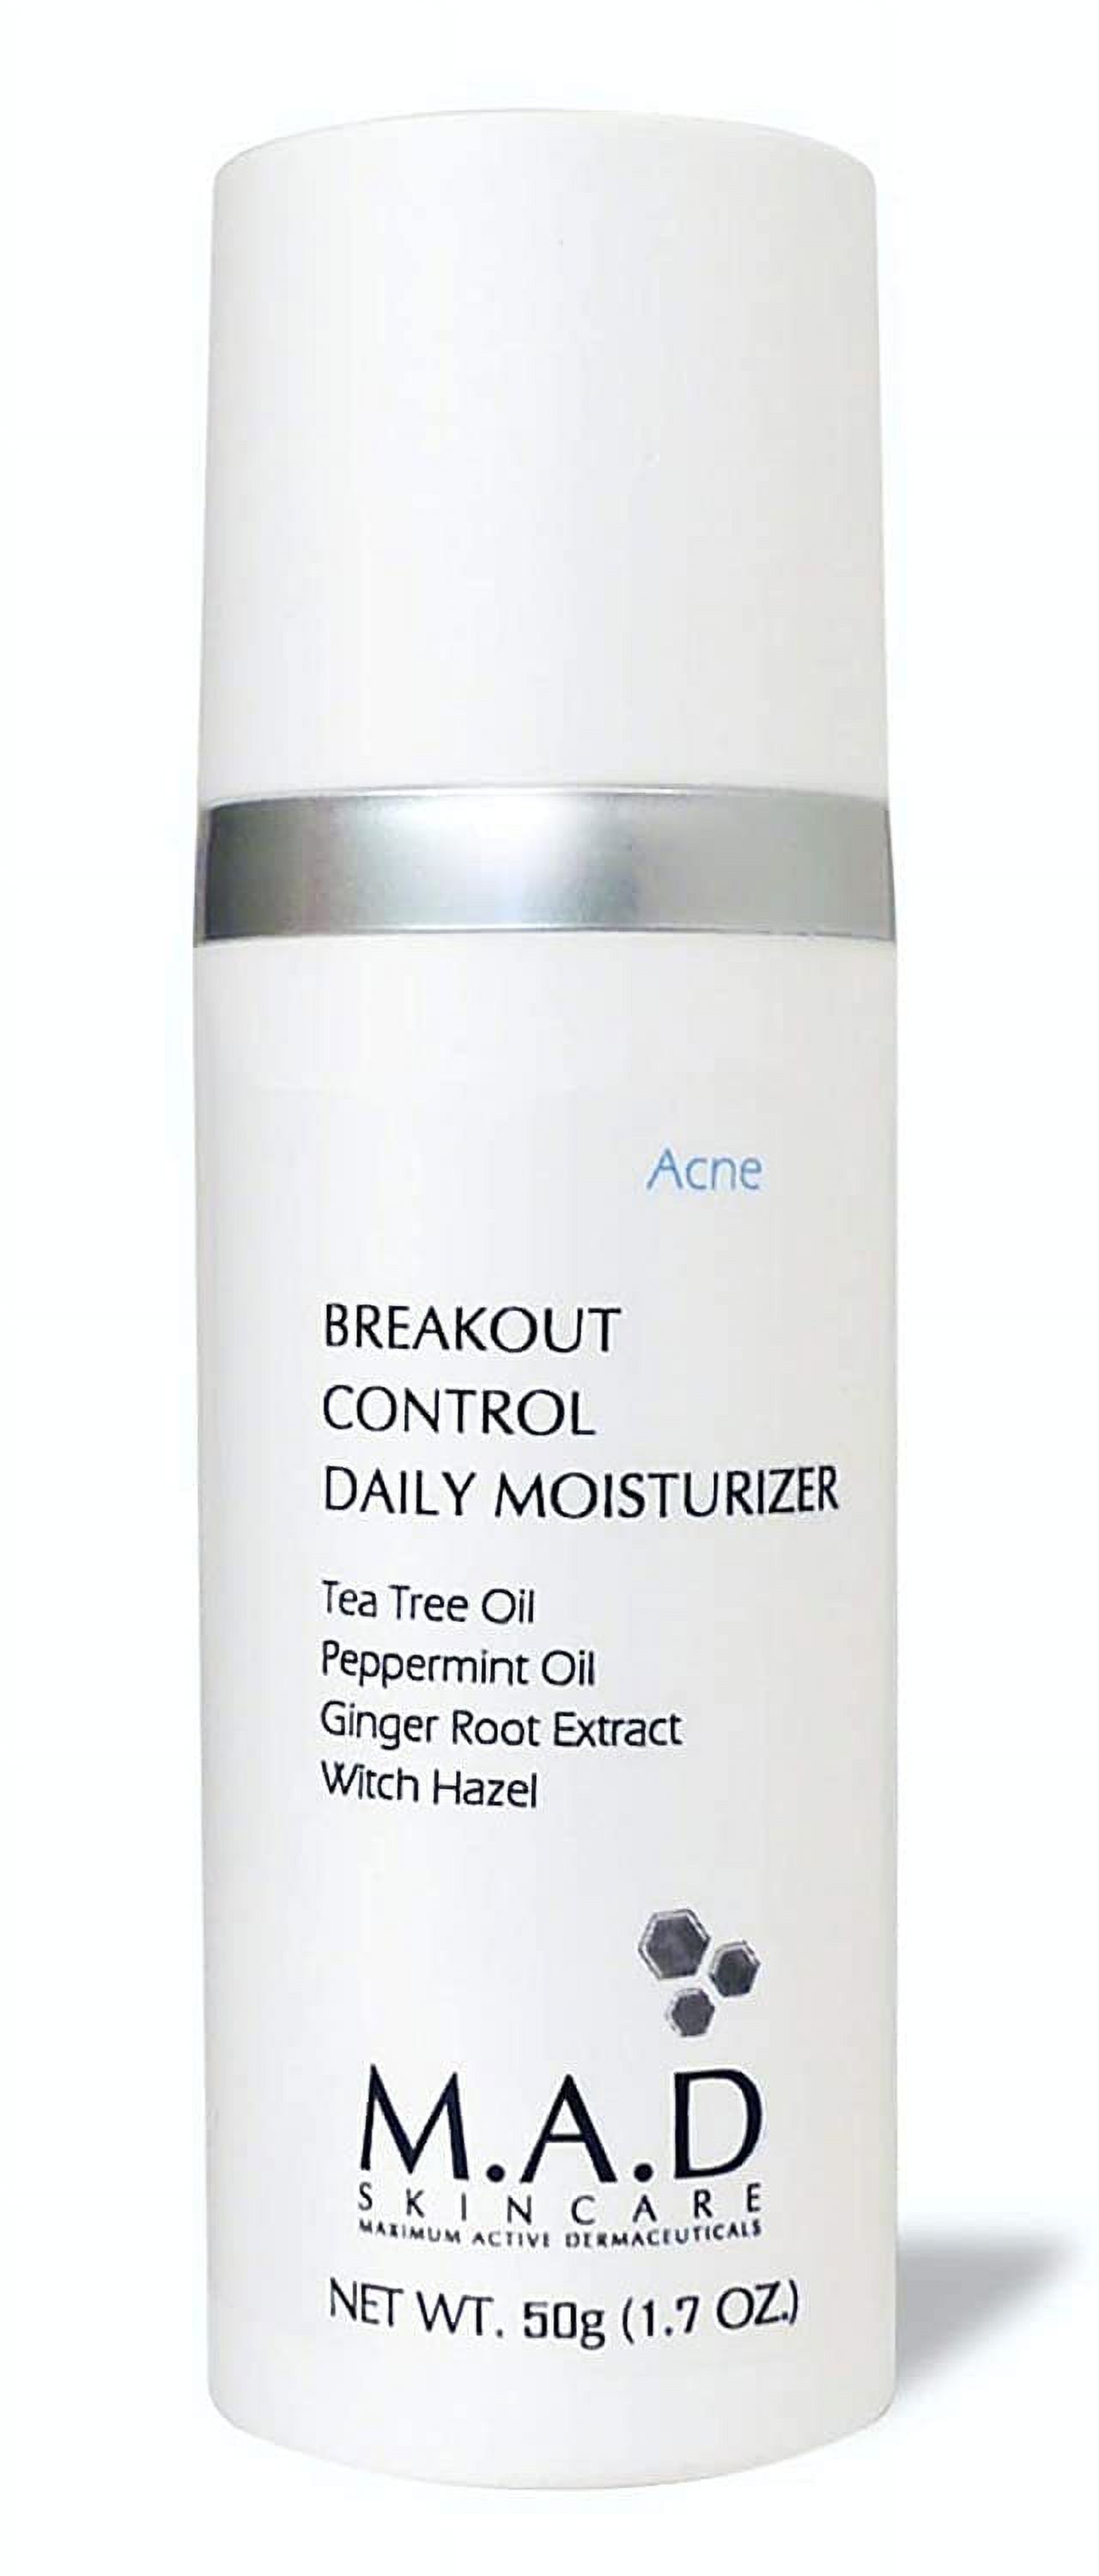 M.A.D Skincare Breakout Control Daily Moisturizer - For Acne Prone Skin 1.7 oz - image 1 of 2